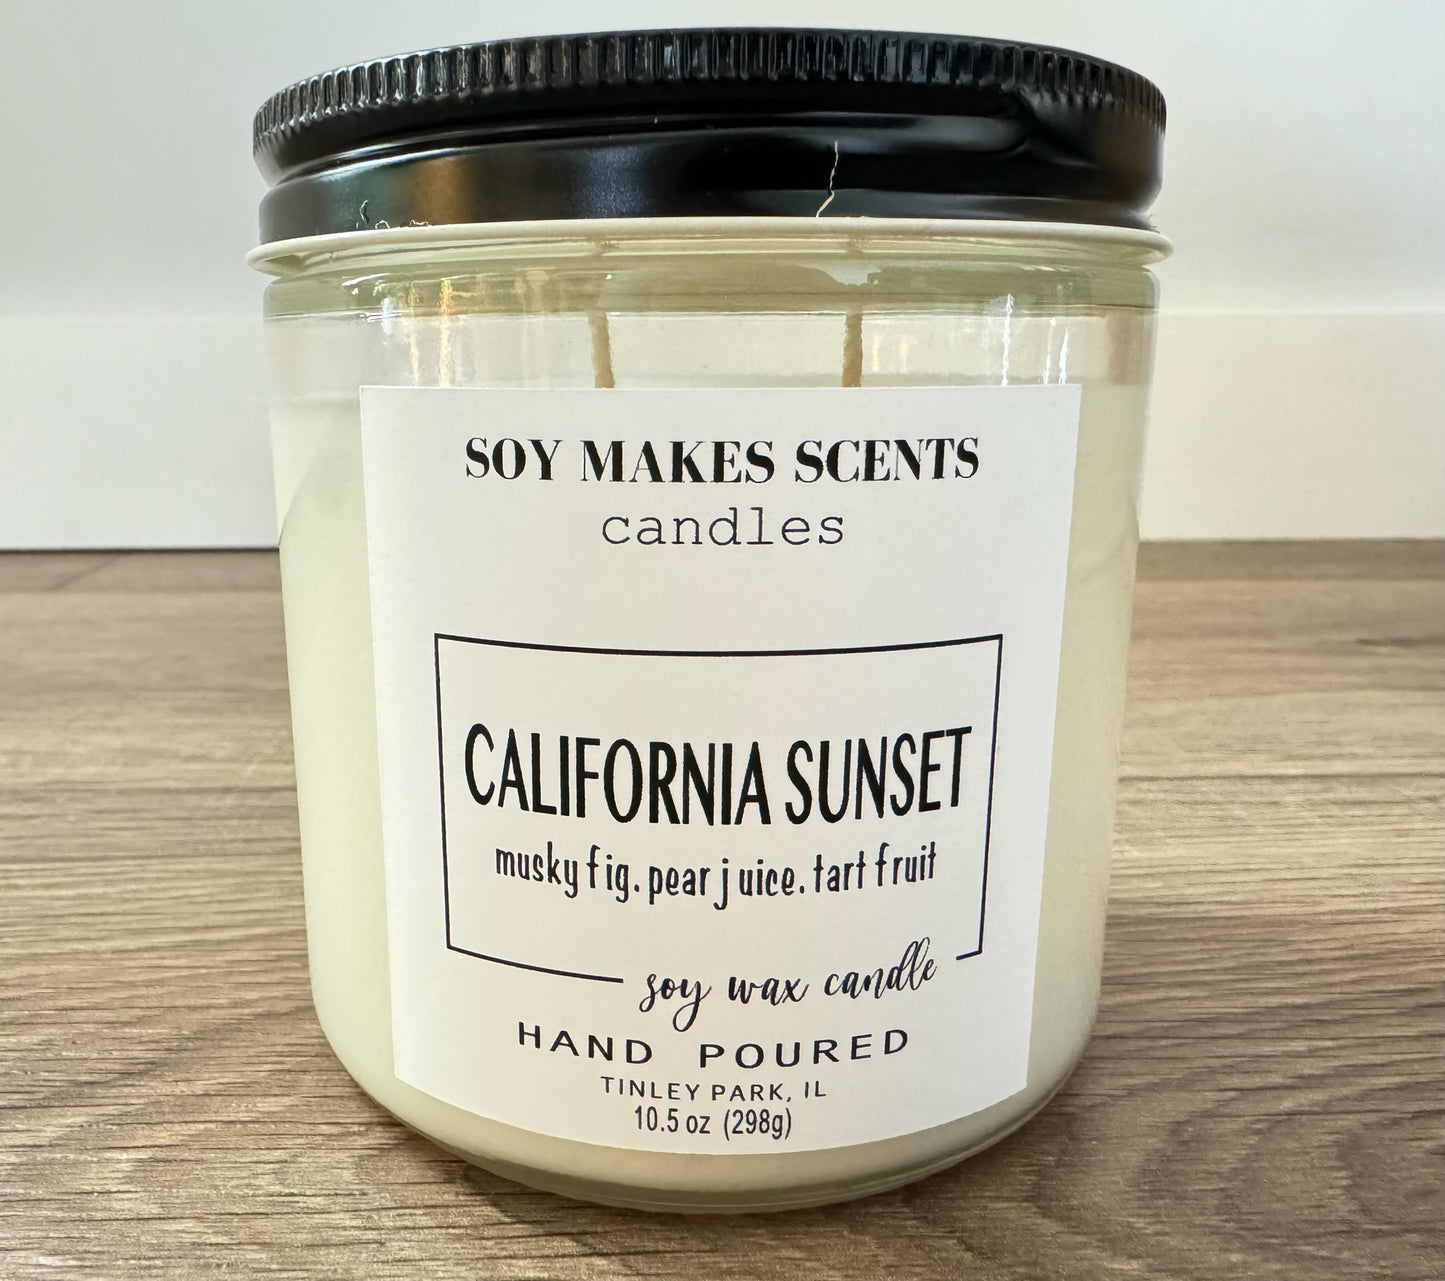 California Sunset 10.5oz soy wax candle